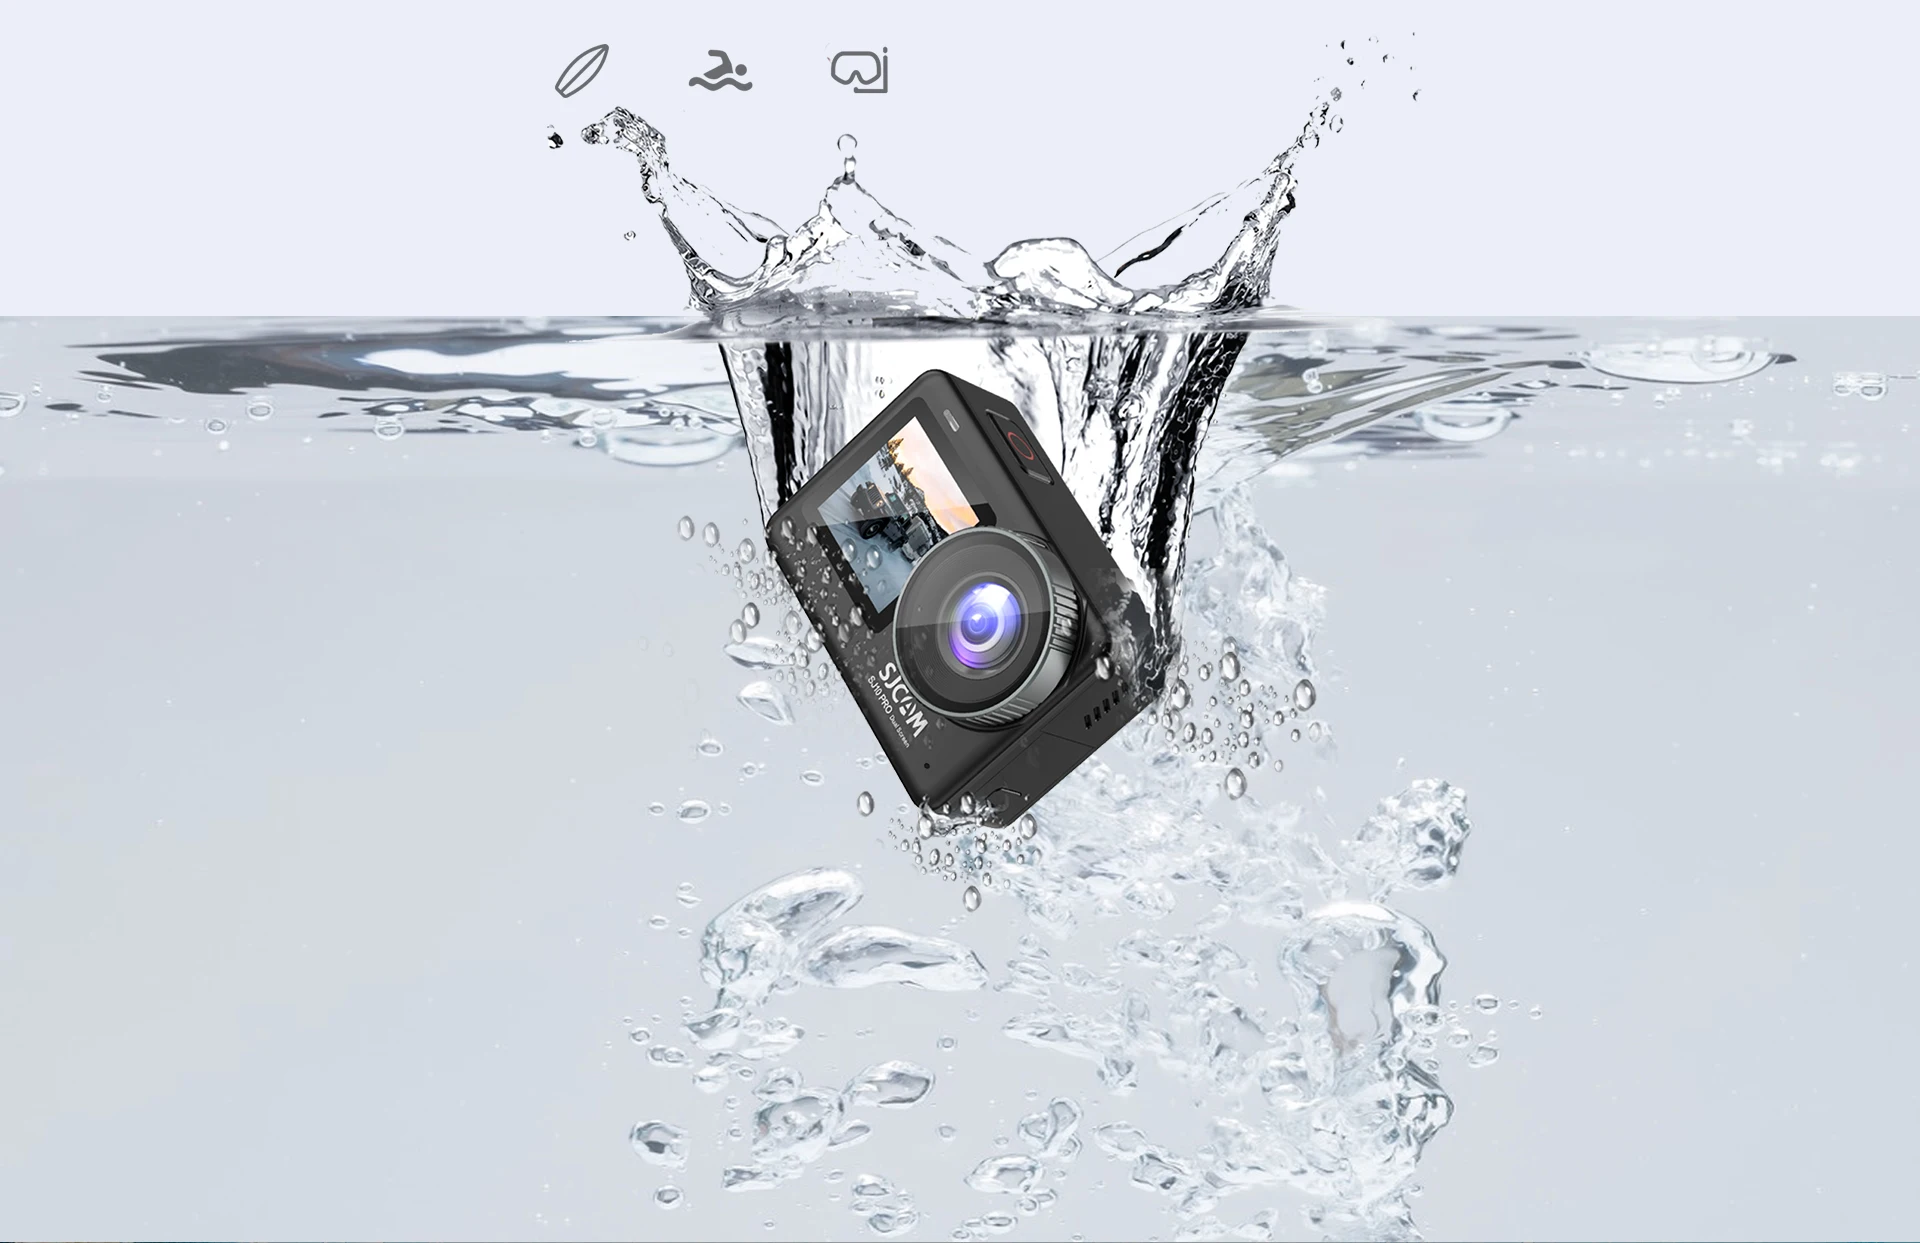 sport-camera-6-axis EIS anti-shake function easy to capture the dynamic and  wonderful moments -Ausek OEM Factory